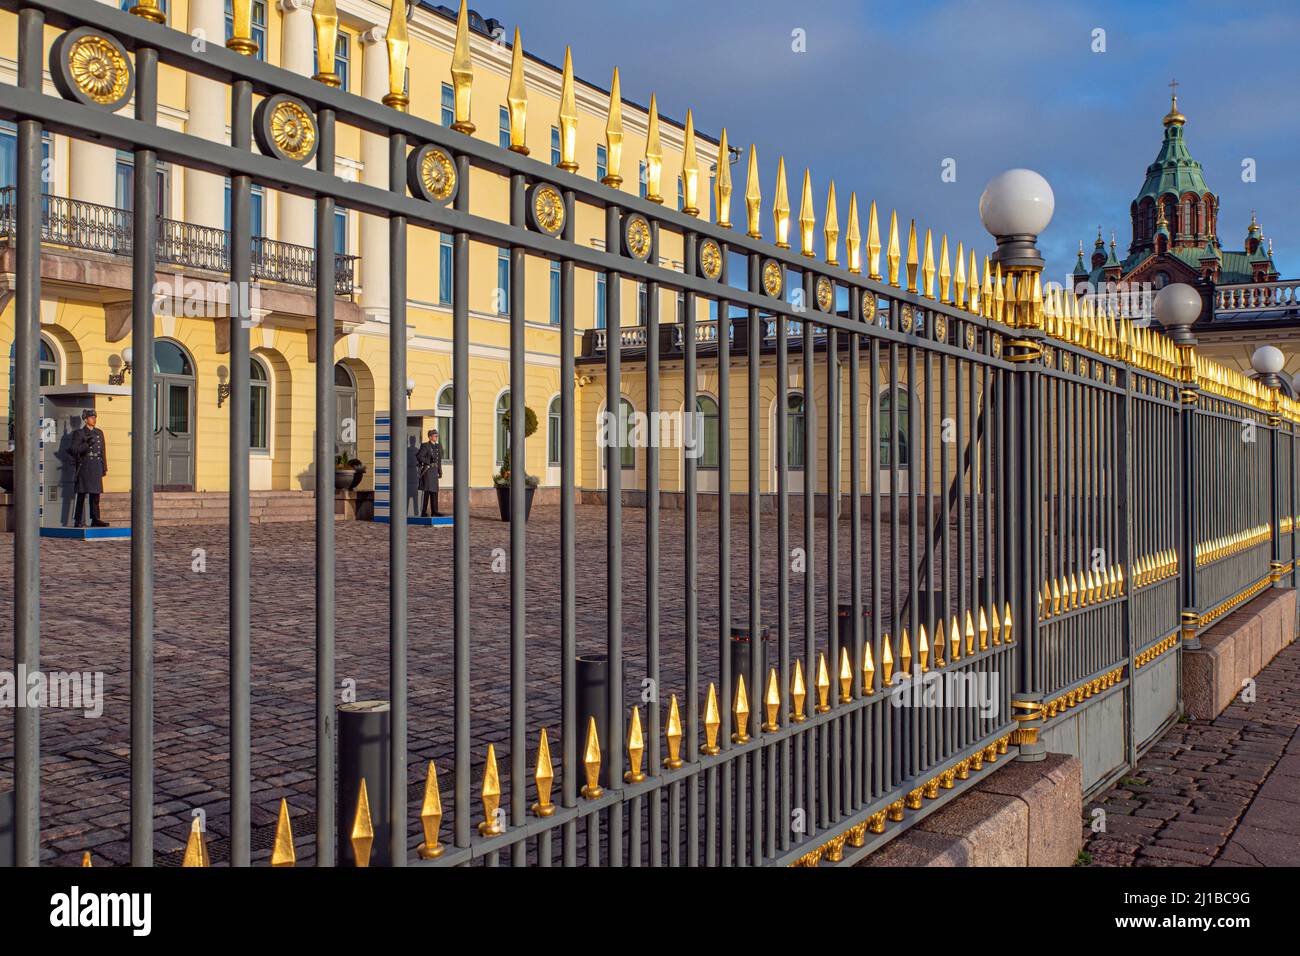 FENCE AND REPUBLICAN GUARDS IN FRONT OF THE FACADE OF THE PRESIDENTIAL PALACE, HELSINKI, FINLAND, EUROPE Stock Photo